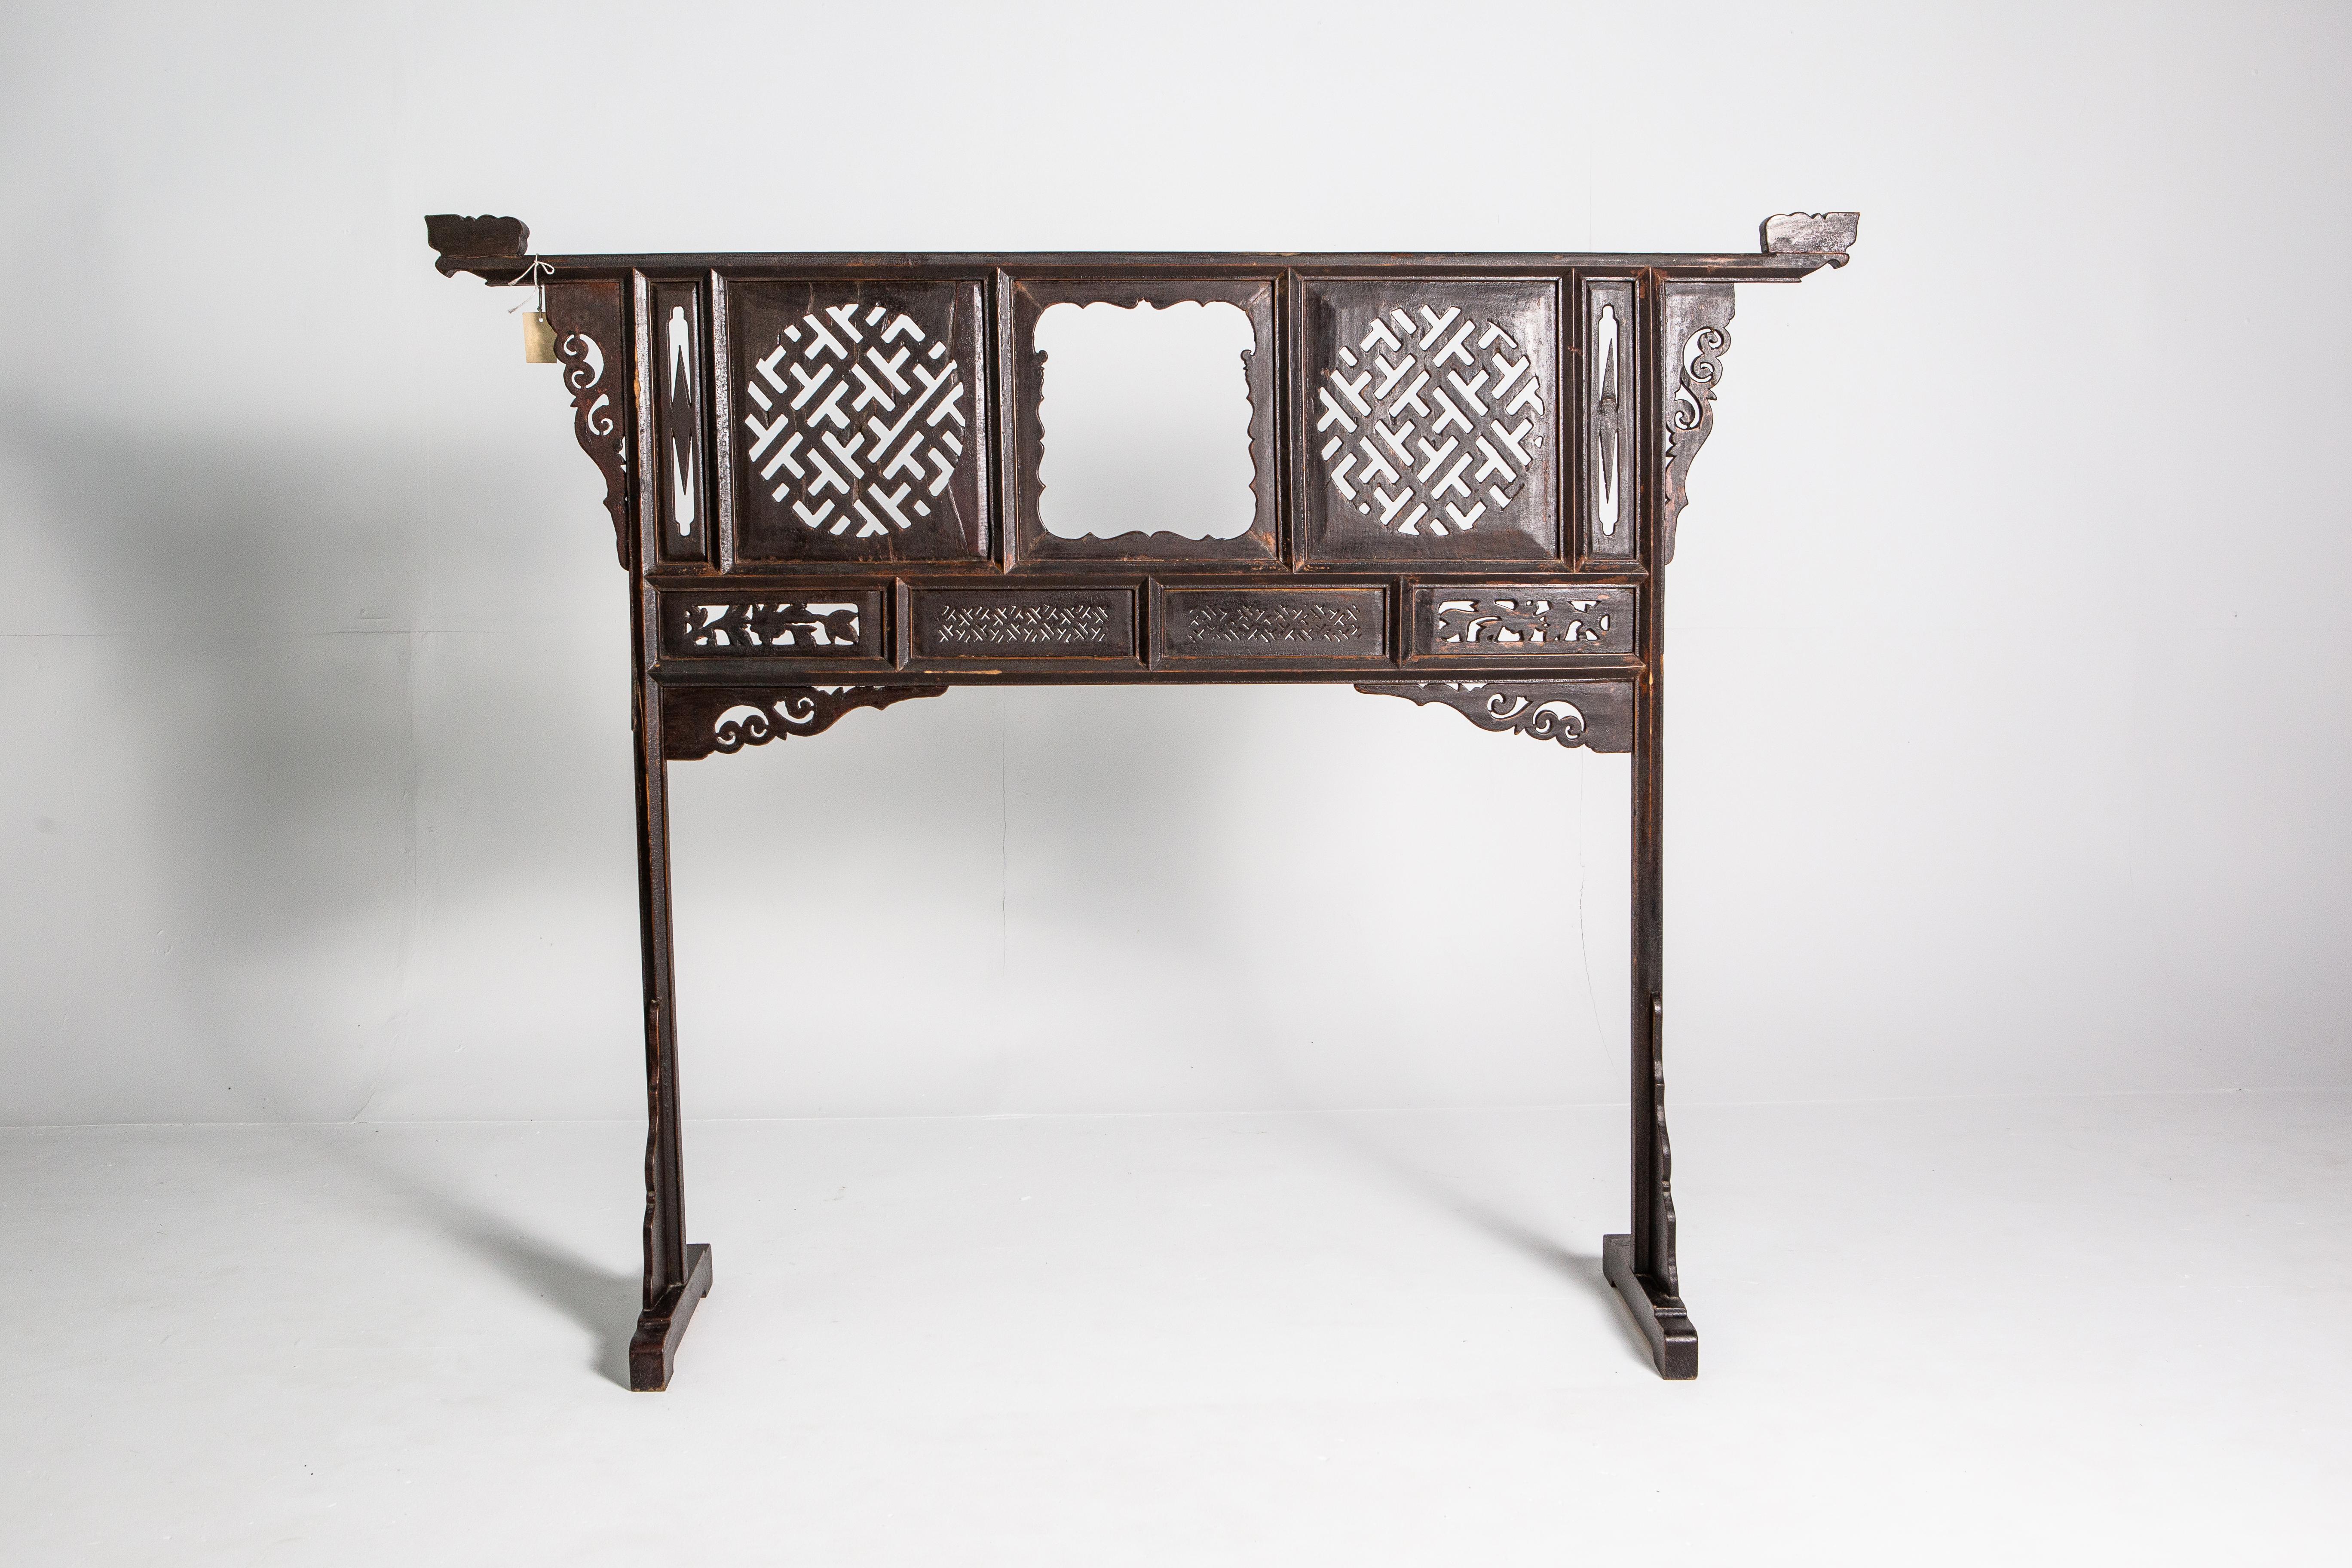 An interesting wooden garment rack of generous proportions that dates back to the Qing Dyansty. Ancient stand-up hangers like these were one of the most prevalent household accessories because Chinese architectural traditions didn’t provide for